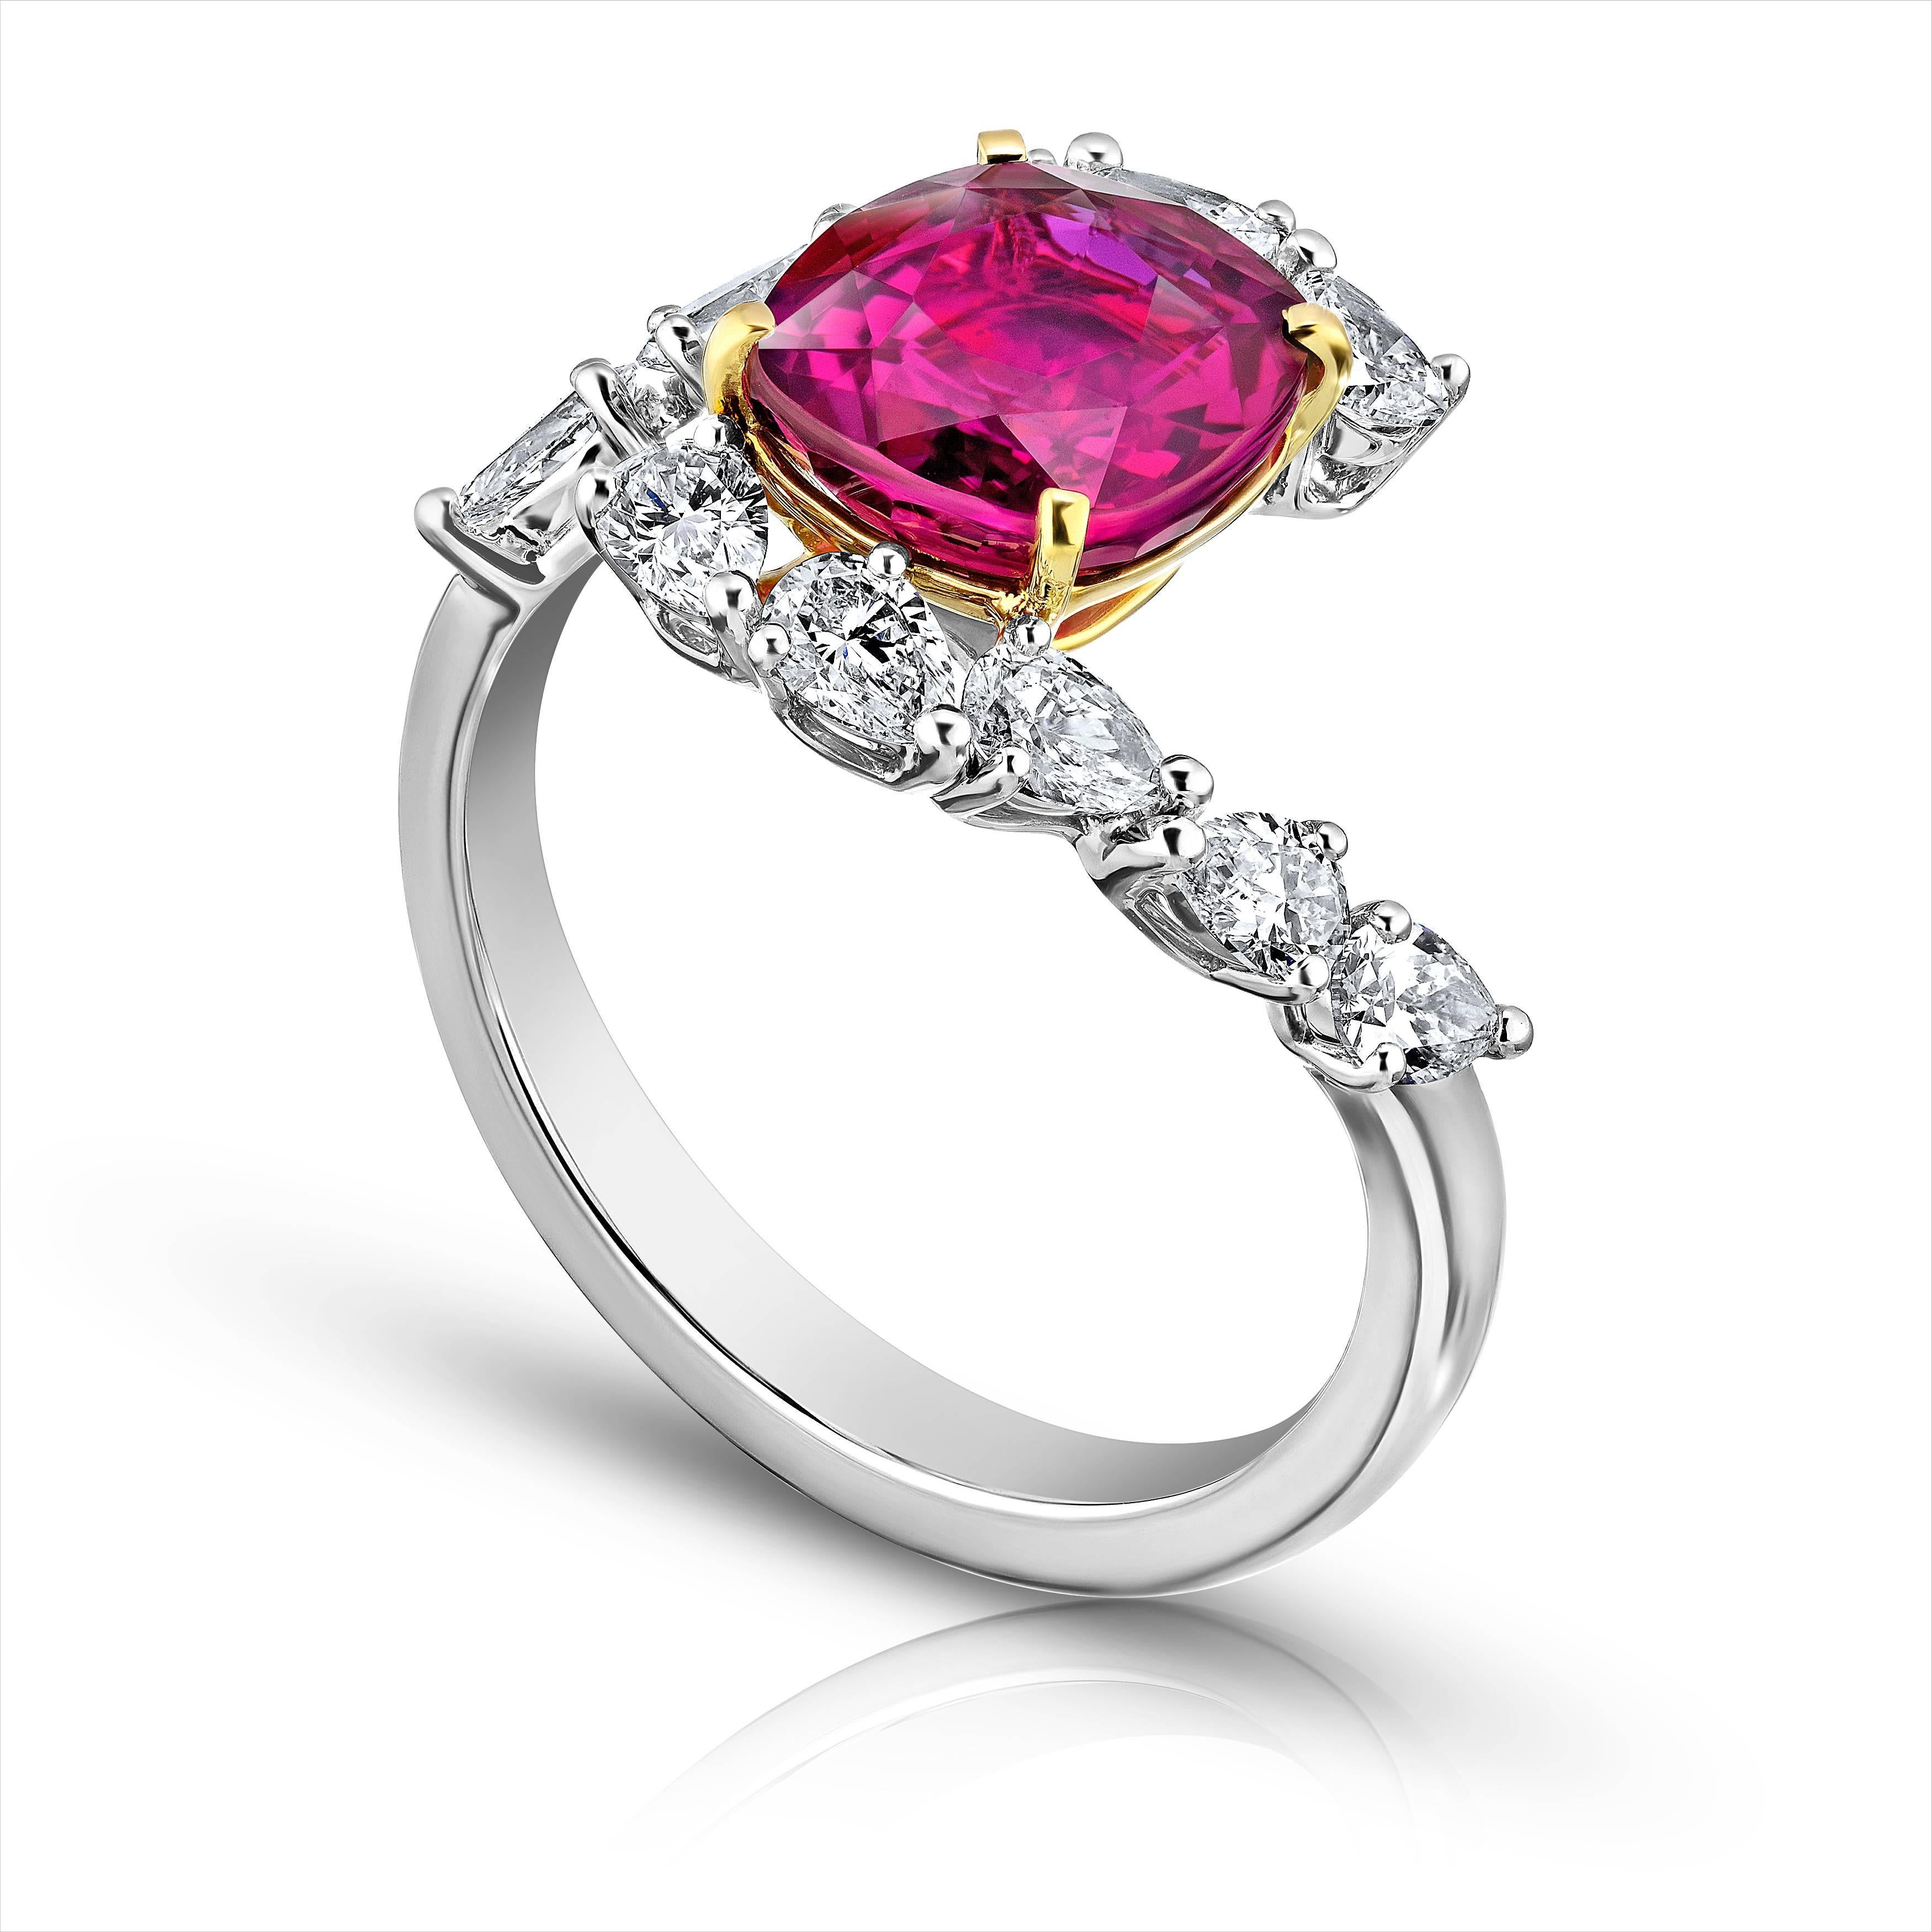 3.36 carat cushion red ruby (Ceylon) with 10 pear shape diamonds .98 carats set in a platinum and 18k yellow gold ring. This ring is a work of ant with a magnificent ruby. Its currently a size 7 but we will resize to your finger size at no charge. 
